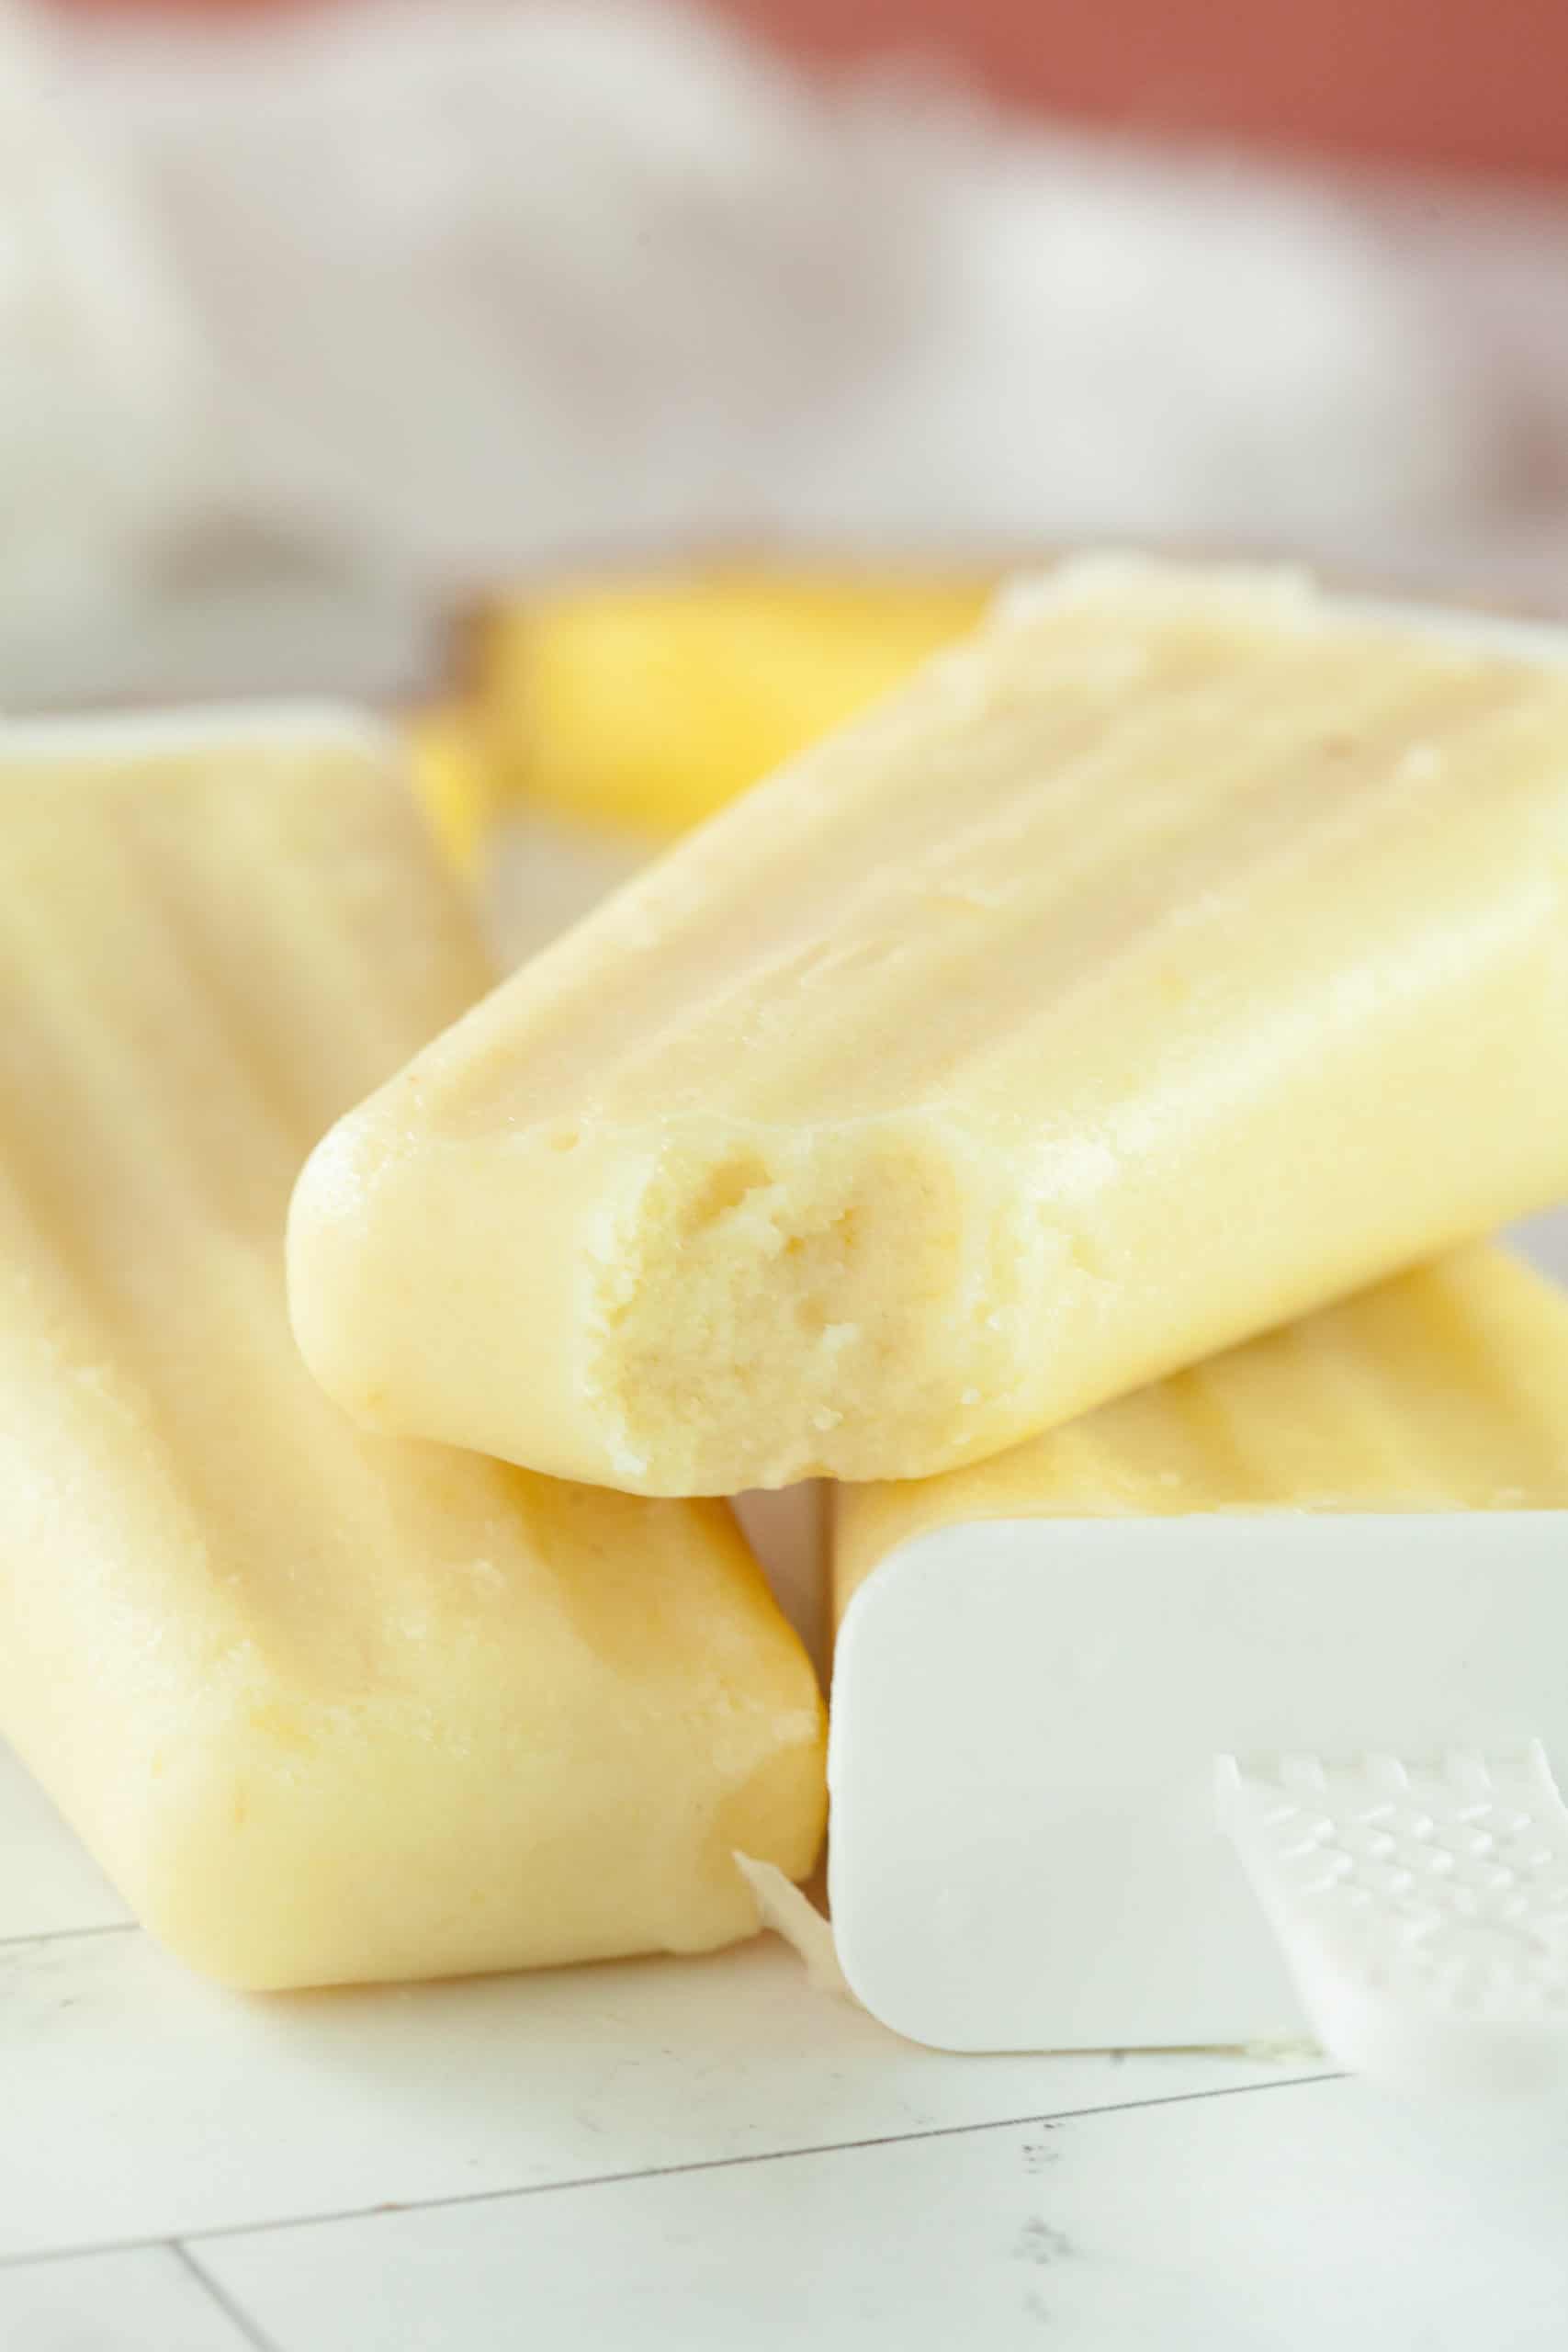 Stack of Pina colada popsicles.